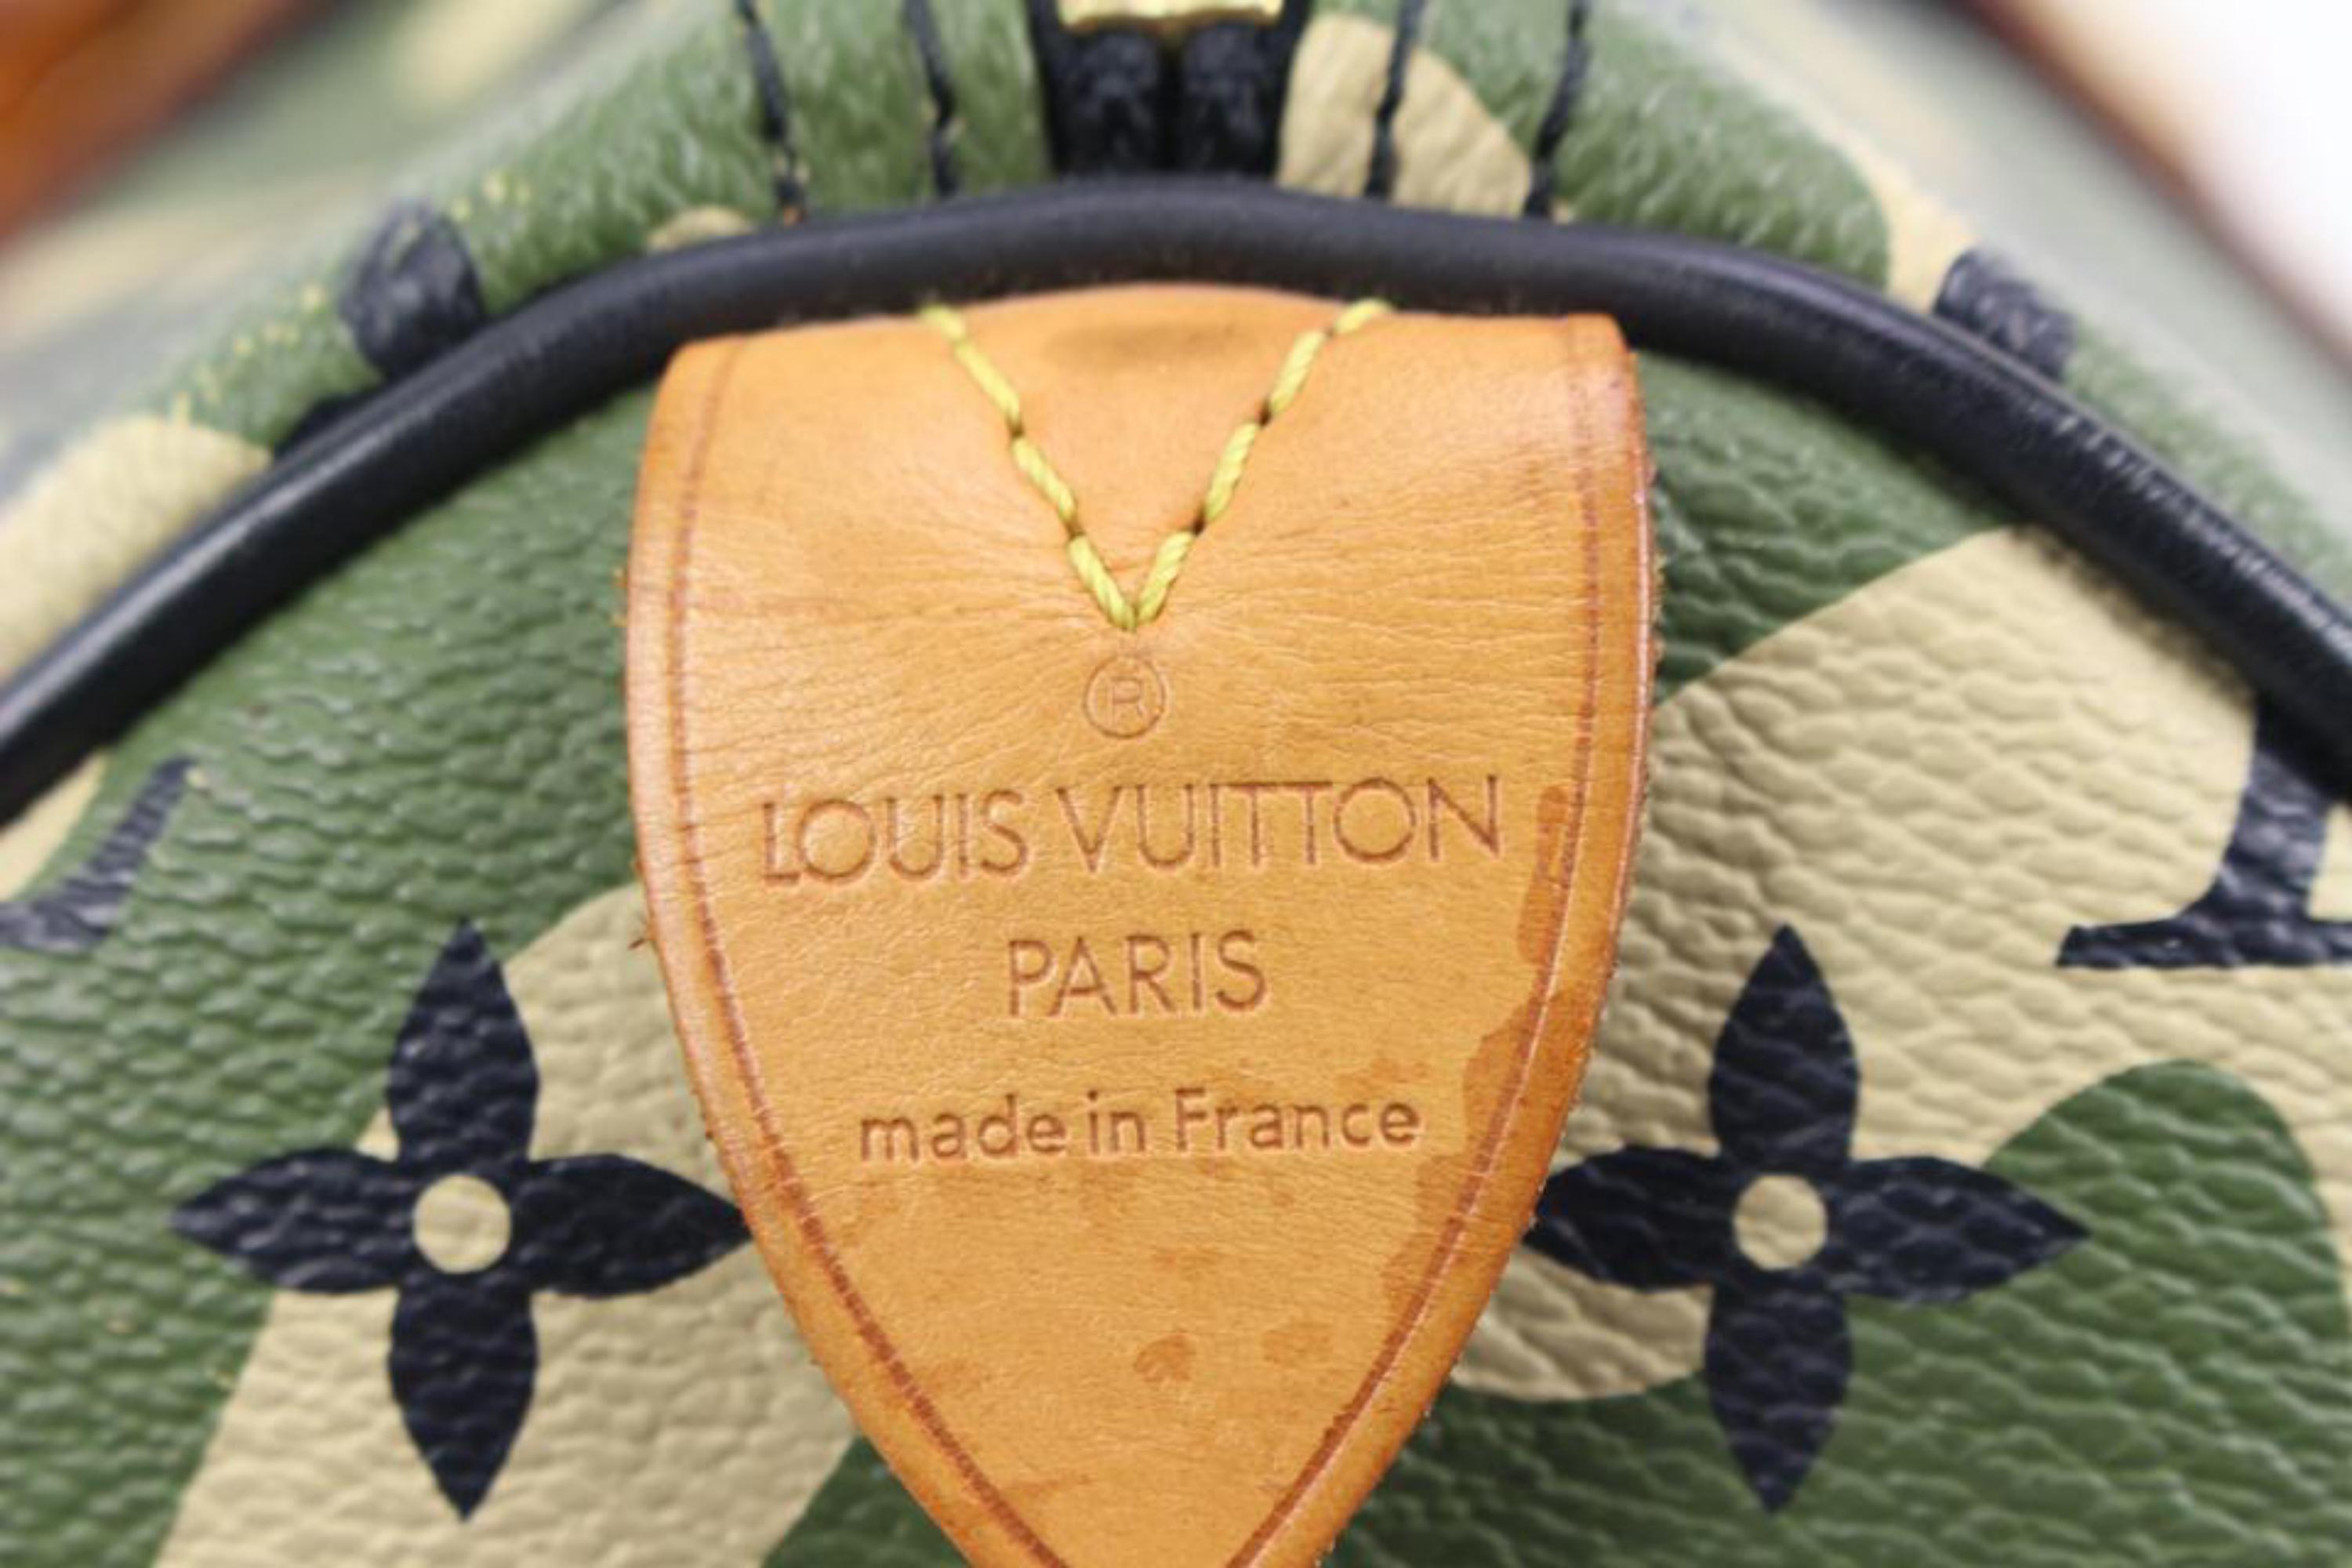 Louis Vuitton Limited Monogram Camo Murakami Monogramouflage Speedy 35 s331lk46
Date Code/Serial Number: AA2078
Made In: France
Measurements: Length:  13.5